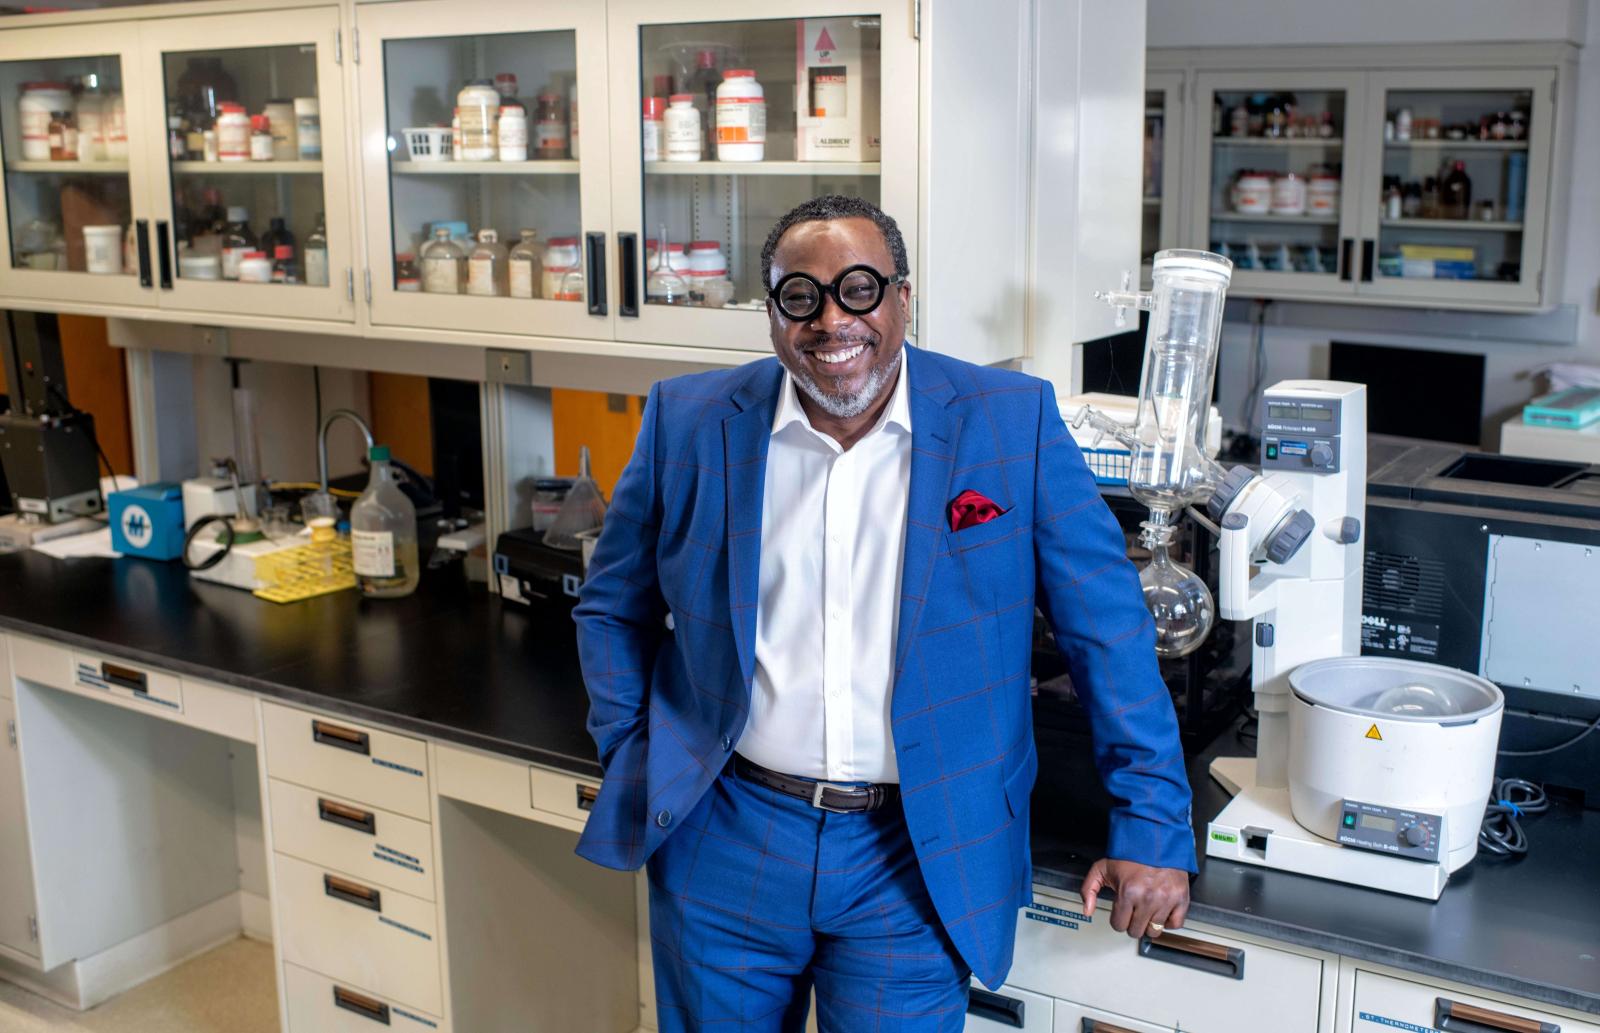 Earl Ettienne leaning against a counter in a medical lab